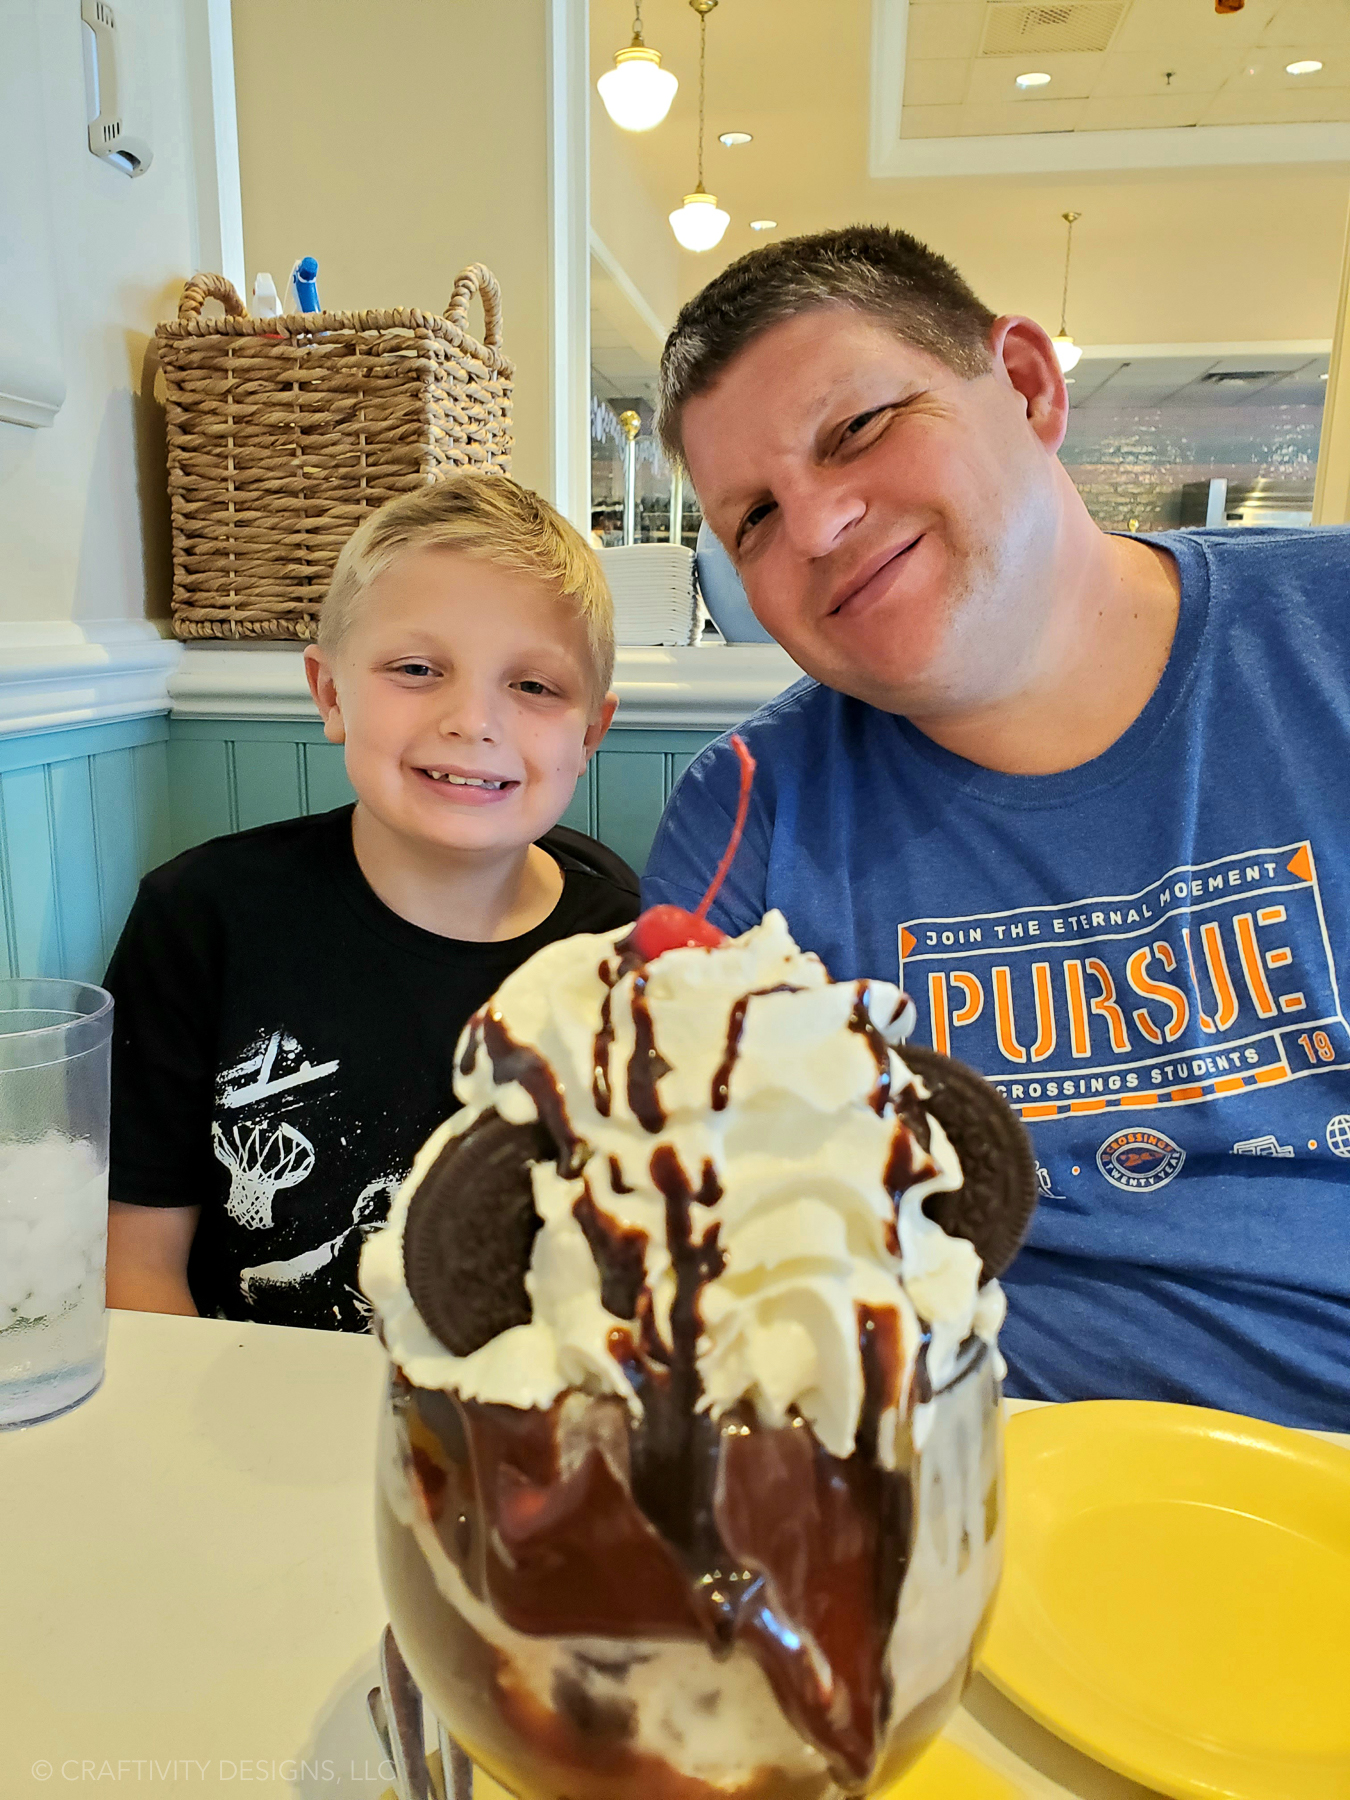 Beaches and Cream Soda Shop - Father and Son with Sundae